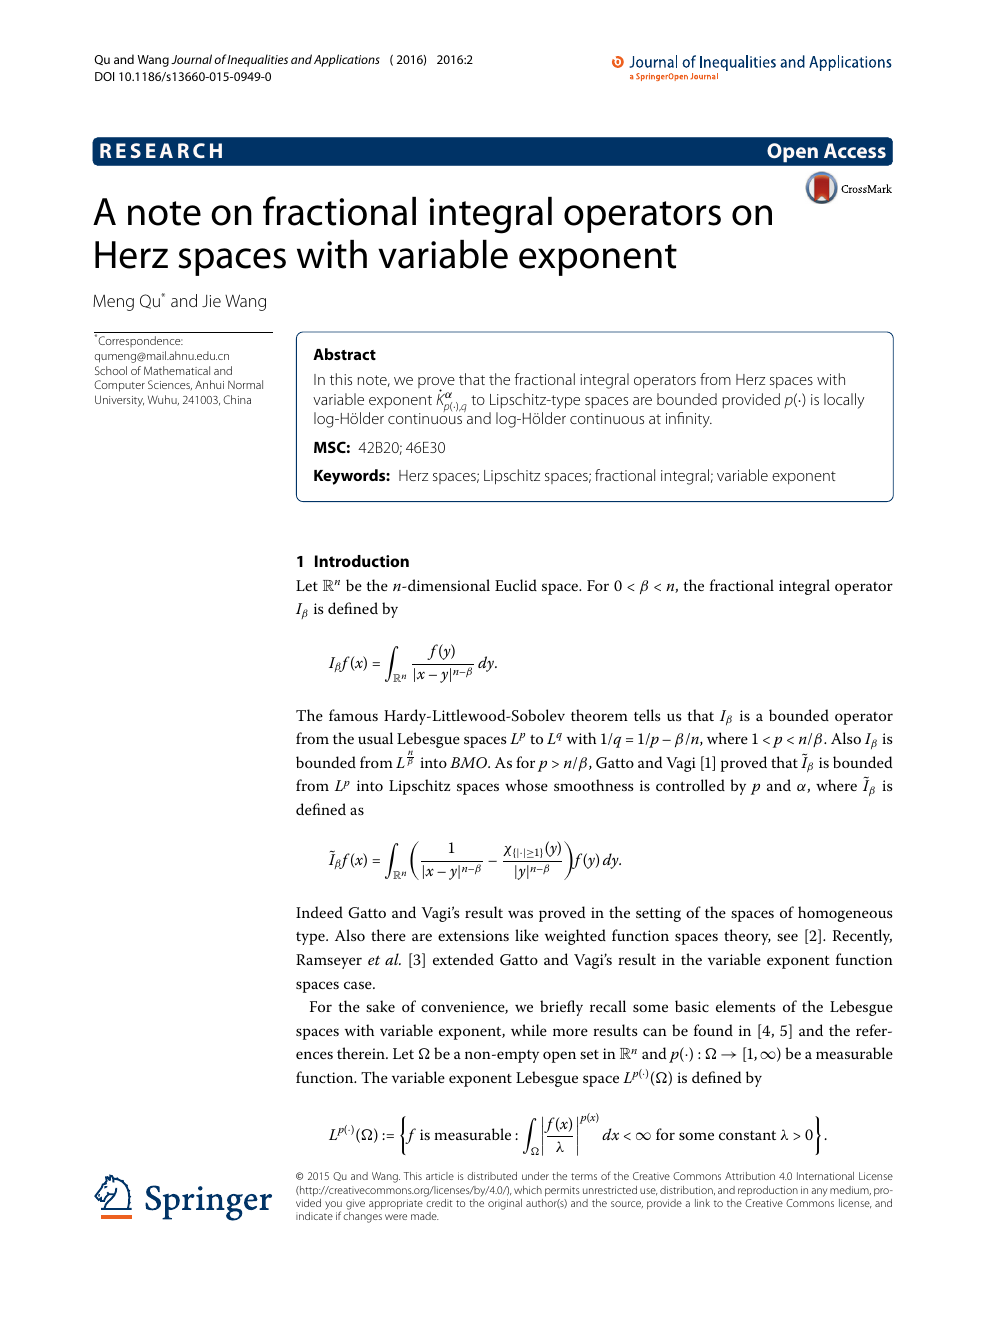 A Note On Fractional Integral Operators On Herz Spaces With Variable Exponent Topic Of Research Paper In Mathematics Download Scholarly Article Pdf And Read For Free On Cyberleninka Open Science Hub